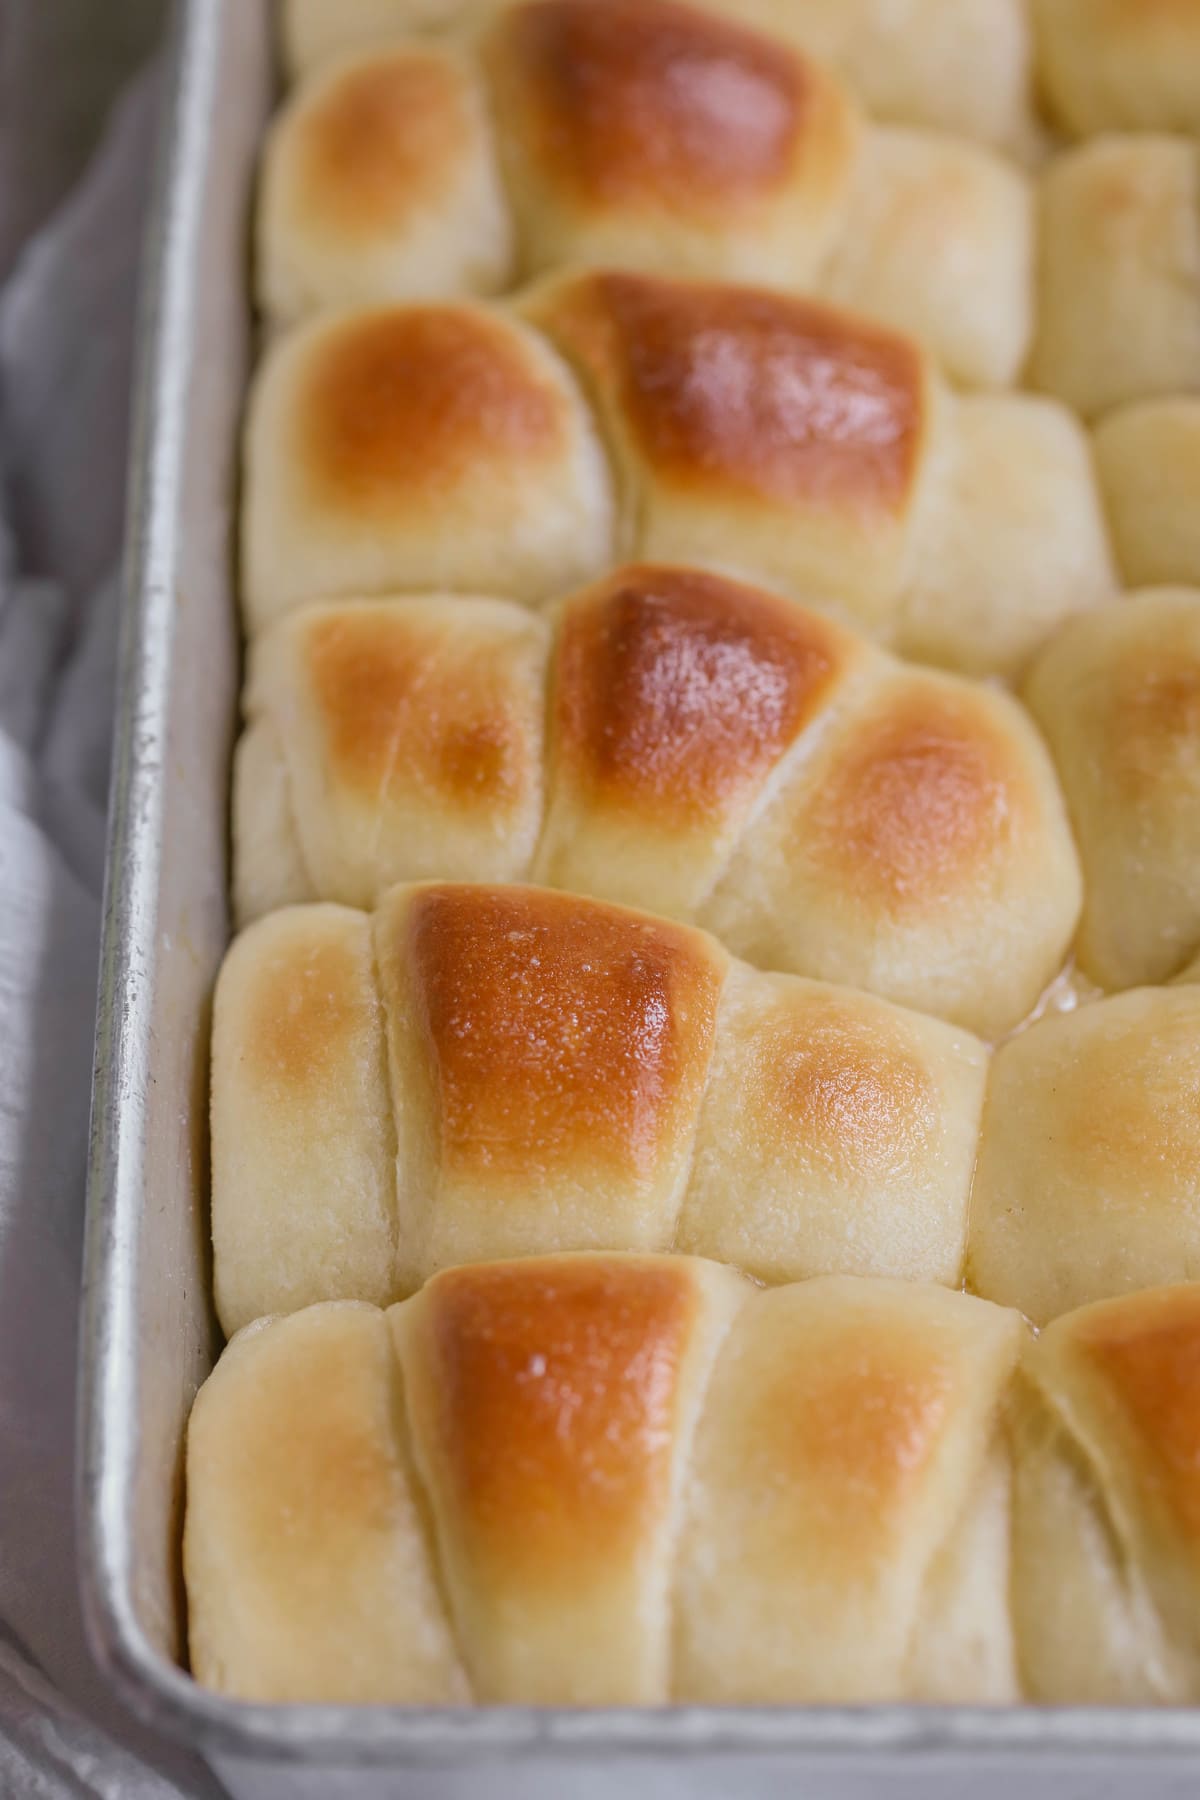 Serve homemade dinner rolls with homemade chicken noodle soup.